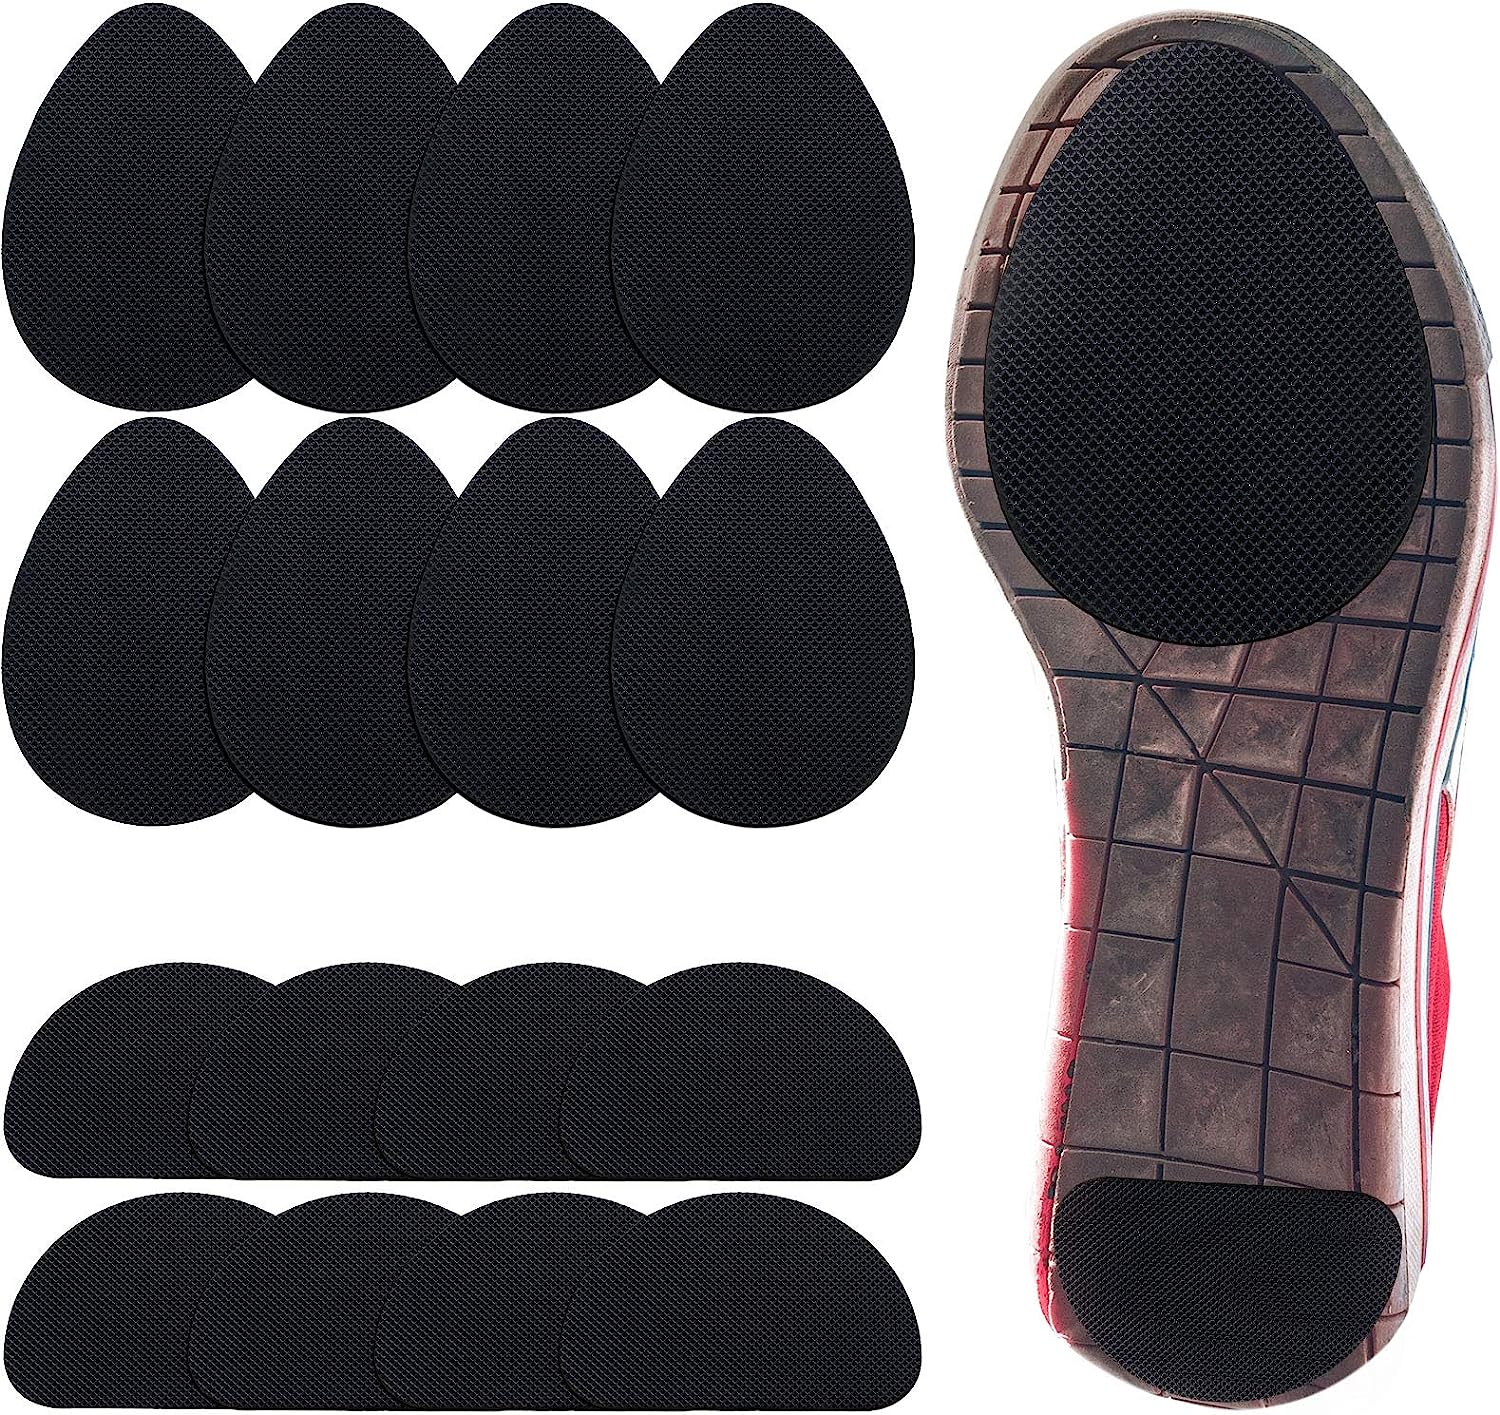 16 Pieces Non-Skid Shoe Pads Self-Adhesive Shoe Grips [...]